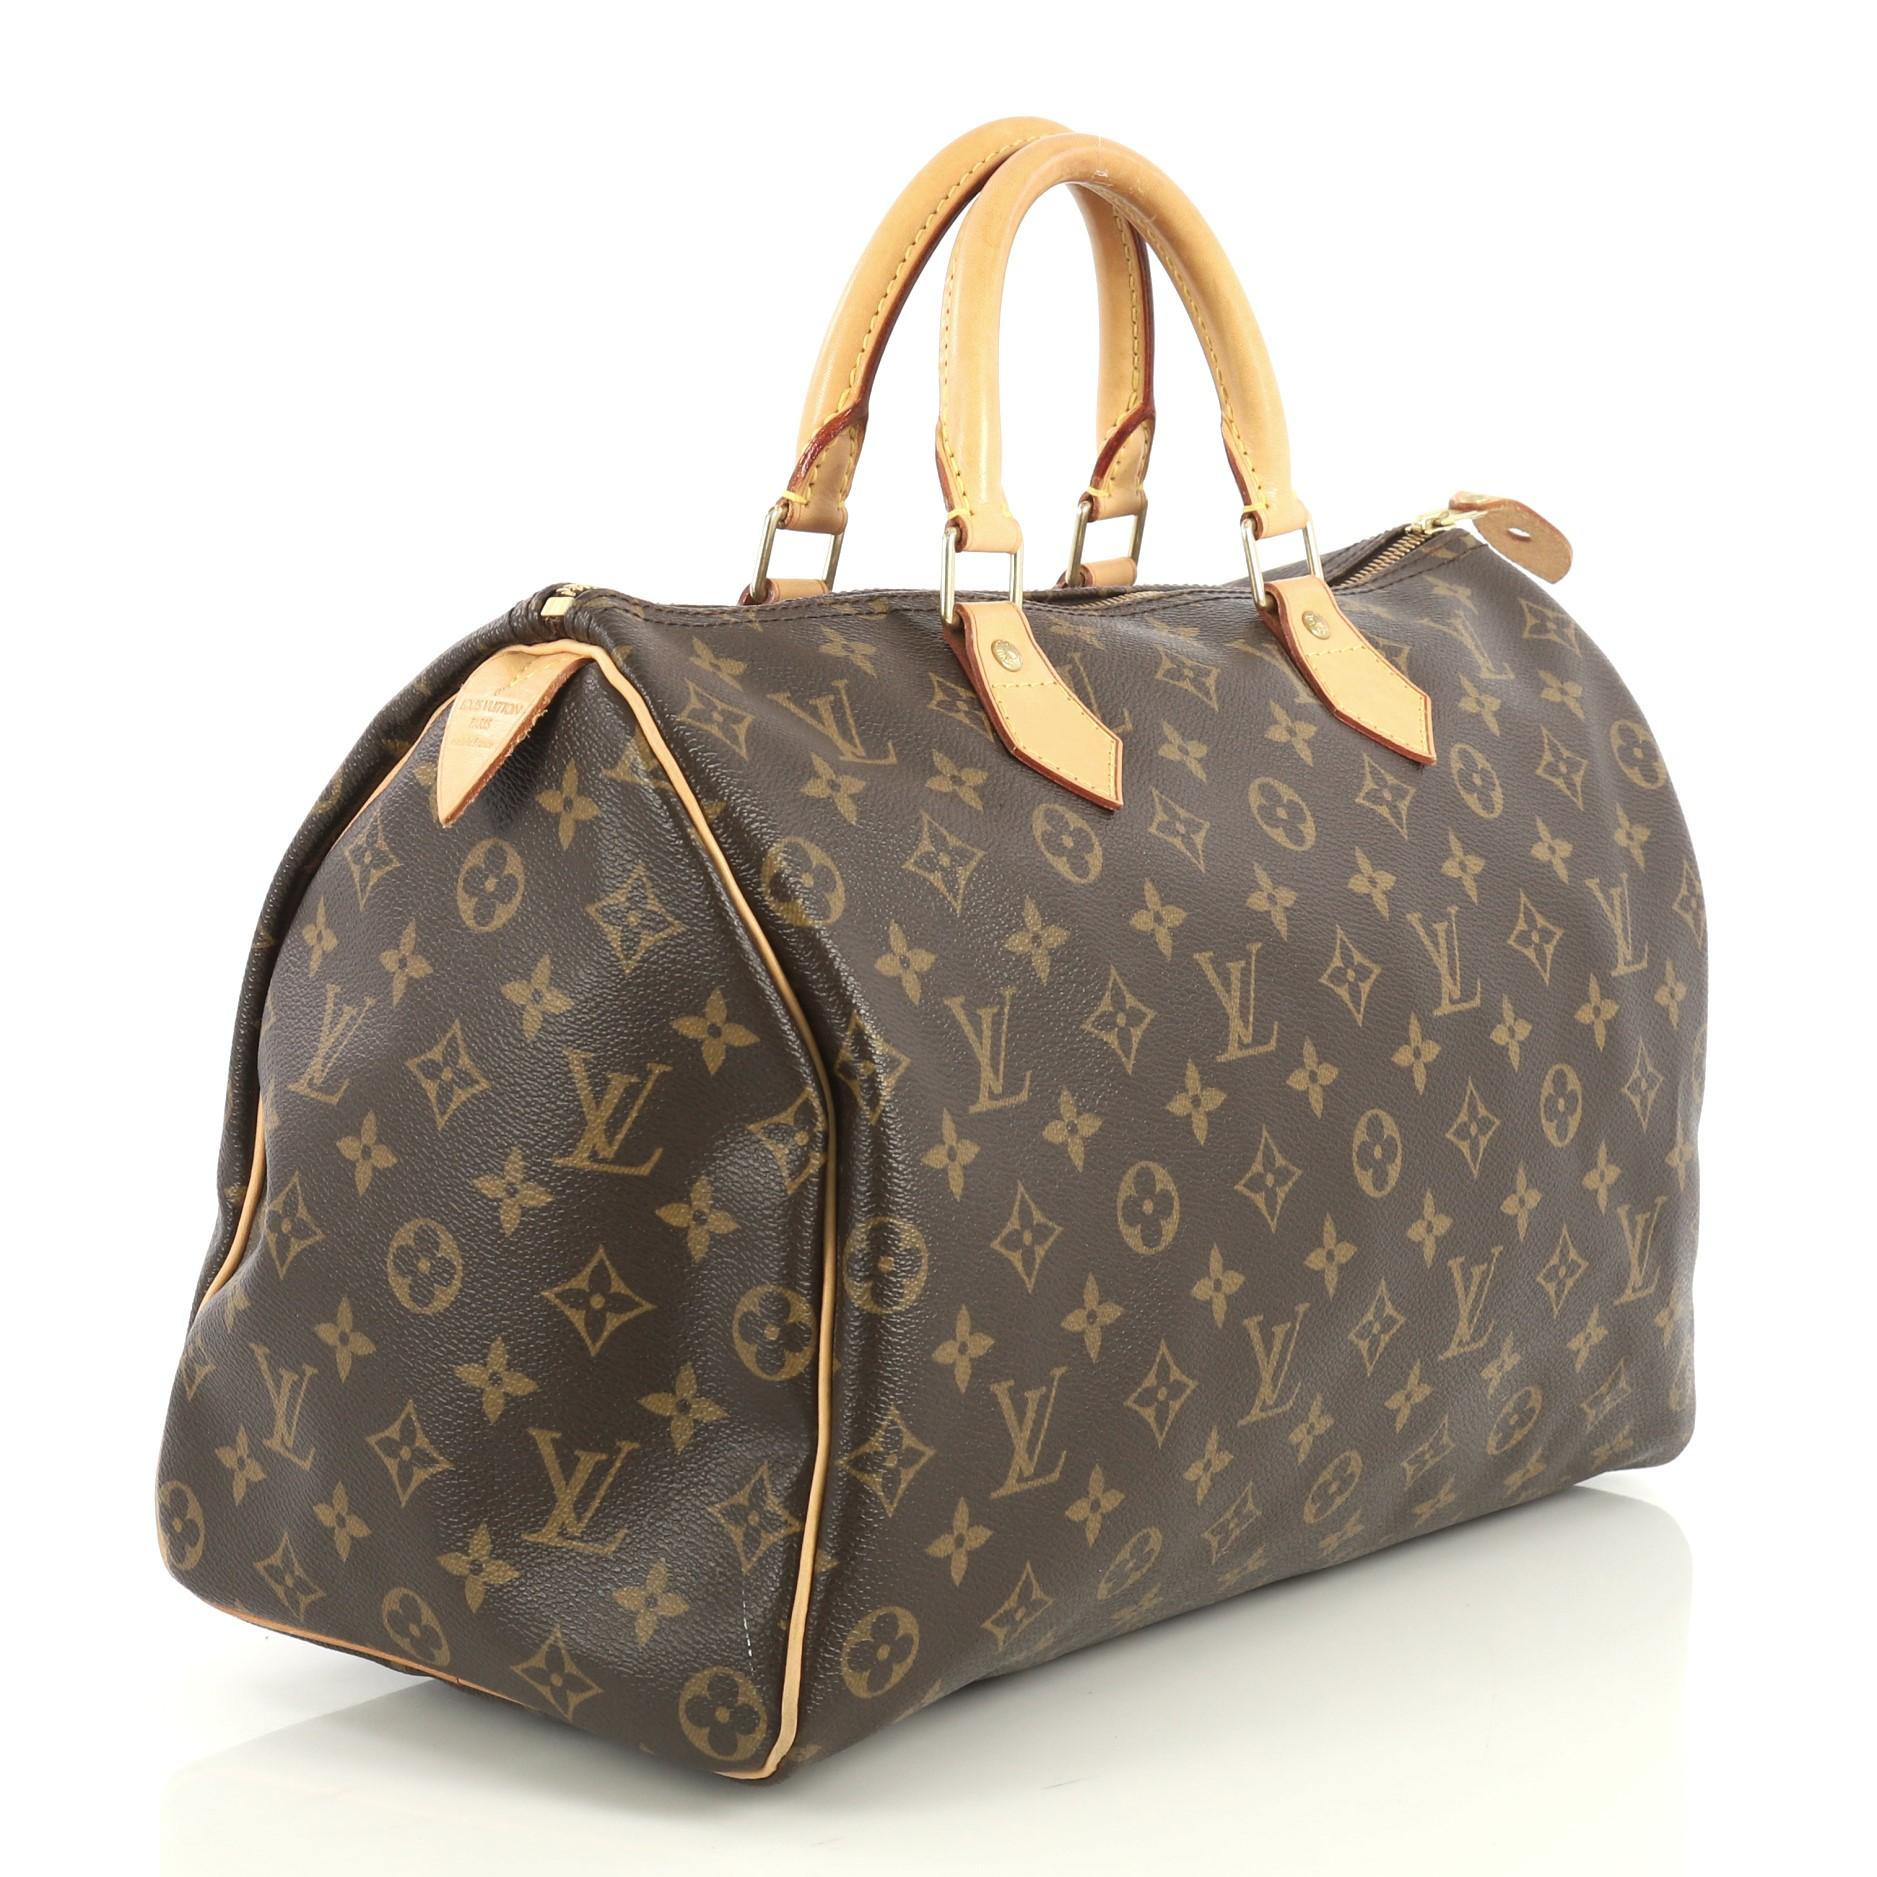 This Louis Vuitton Speedy Handbag Monogram Canvas 35, crafted in brown monogram coated canvas, features dual rolled leather handles, vachetta leather trim, and gold-tone hardware. Its zip closure opens to a brown fabric interior with slip pocket.